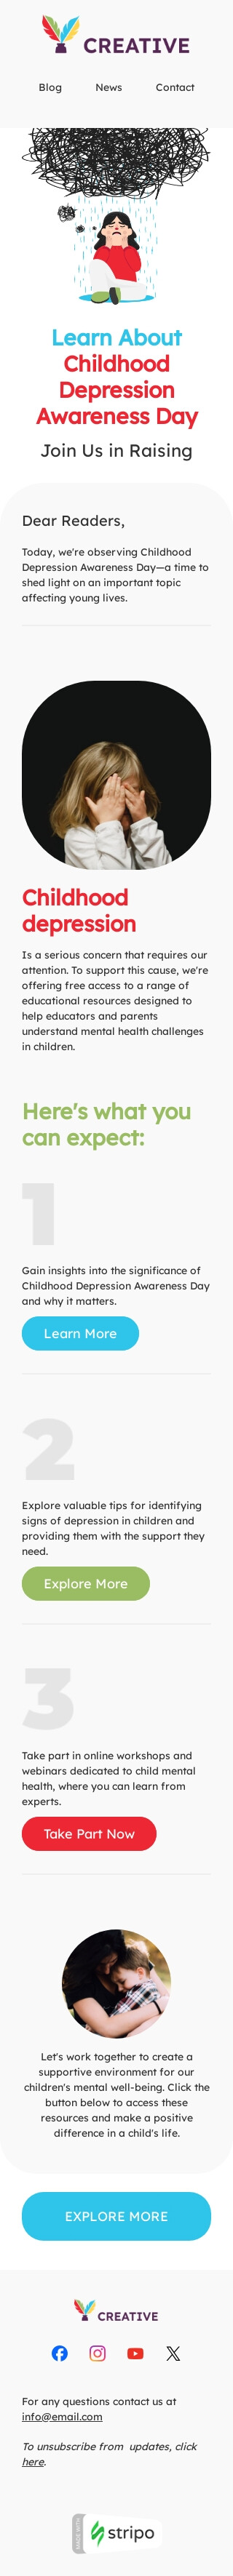 Childhood Depression Awareness Day email template "Childhood depression" for publications & blogging industry mobile view